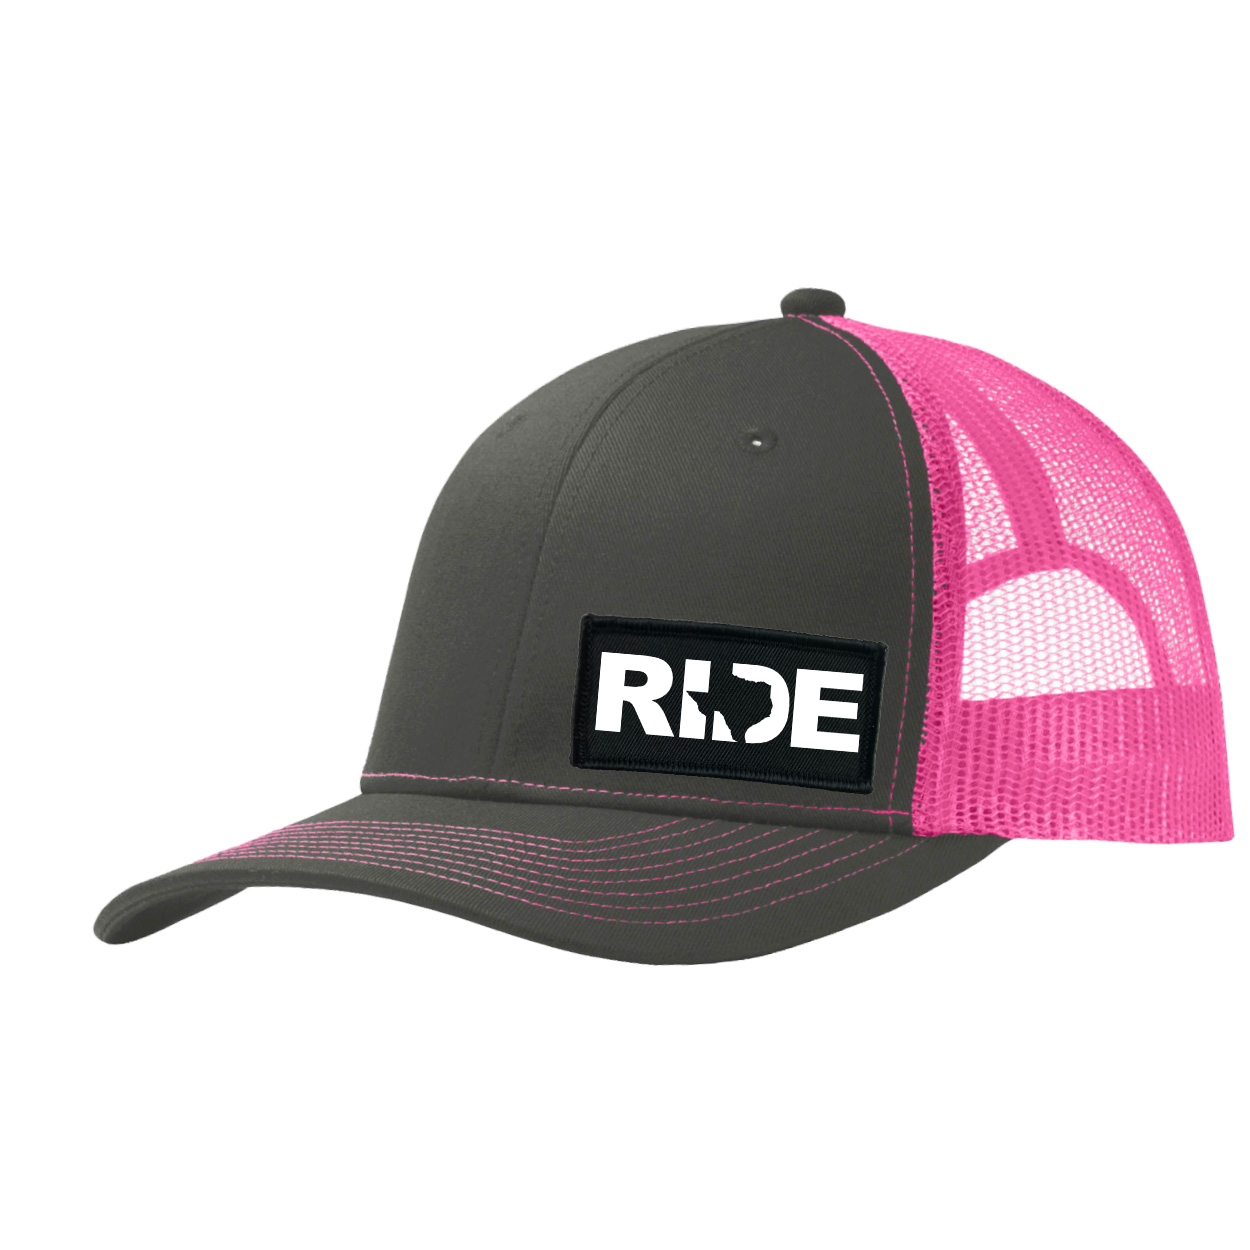 Ride Texas Night Out Woven Patch Snapback Trucker Hat Dark Gray/Neon Pink (White Logo)